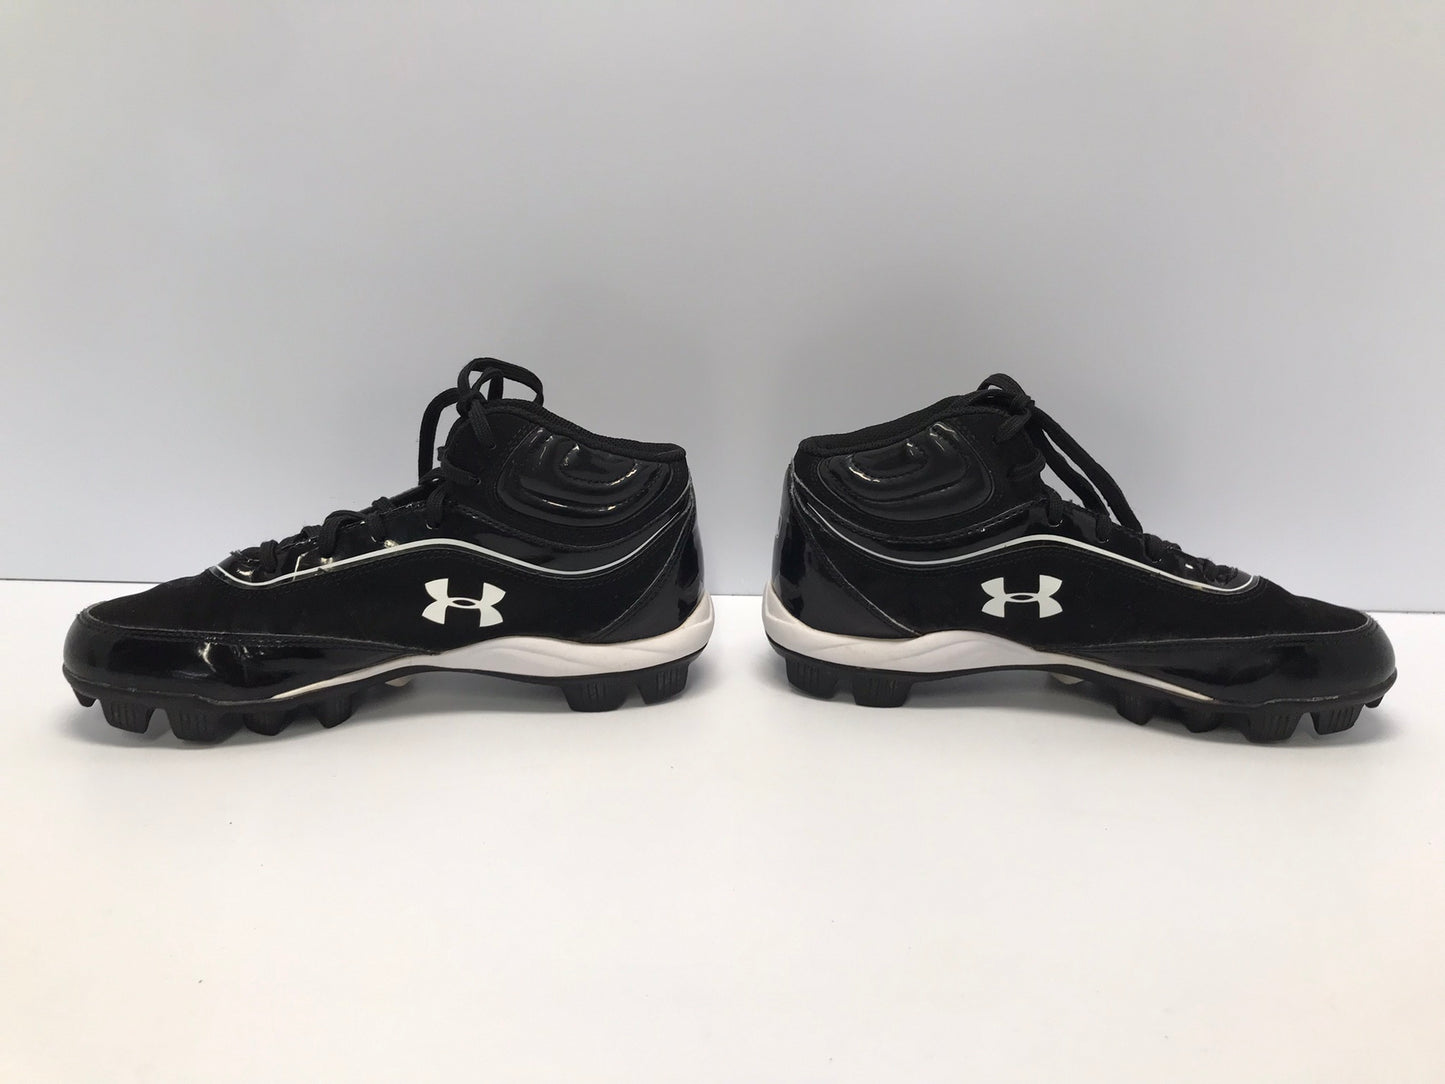 Baseball Shoes Cleats Child Size 5 Under Armour Black White High Top